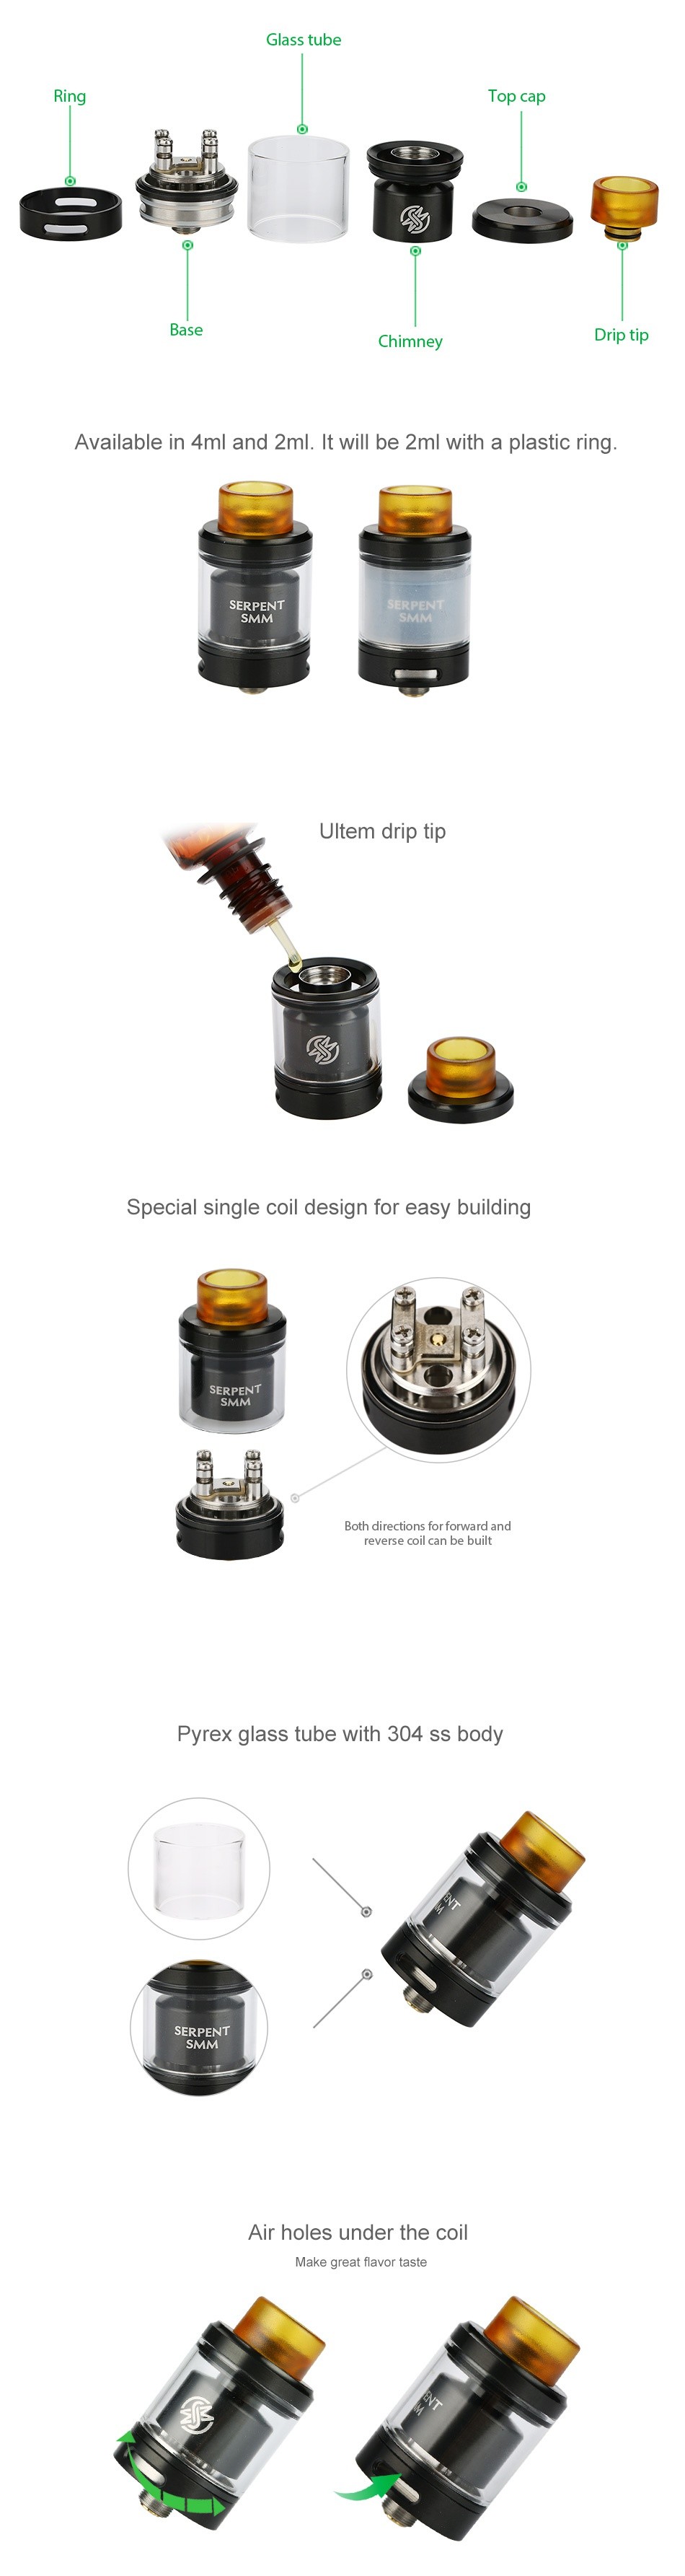 WOTOFO Serpent SMM RTA 4ml Glass tube Top cap Chimney Drip tip Available in 4ml and 2ml  It will be 2ml with a plastic ring pecial single coil design for easy building th directions for forward and Pyrex glass tube with 304 ss body Air holes under the coil